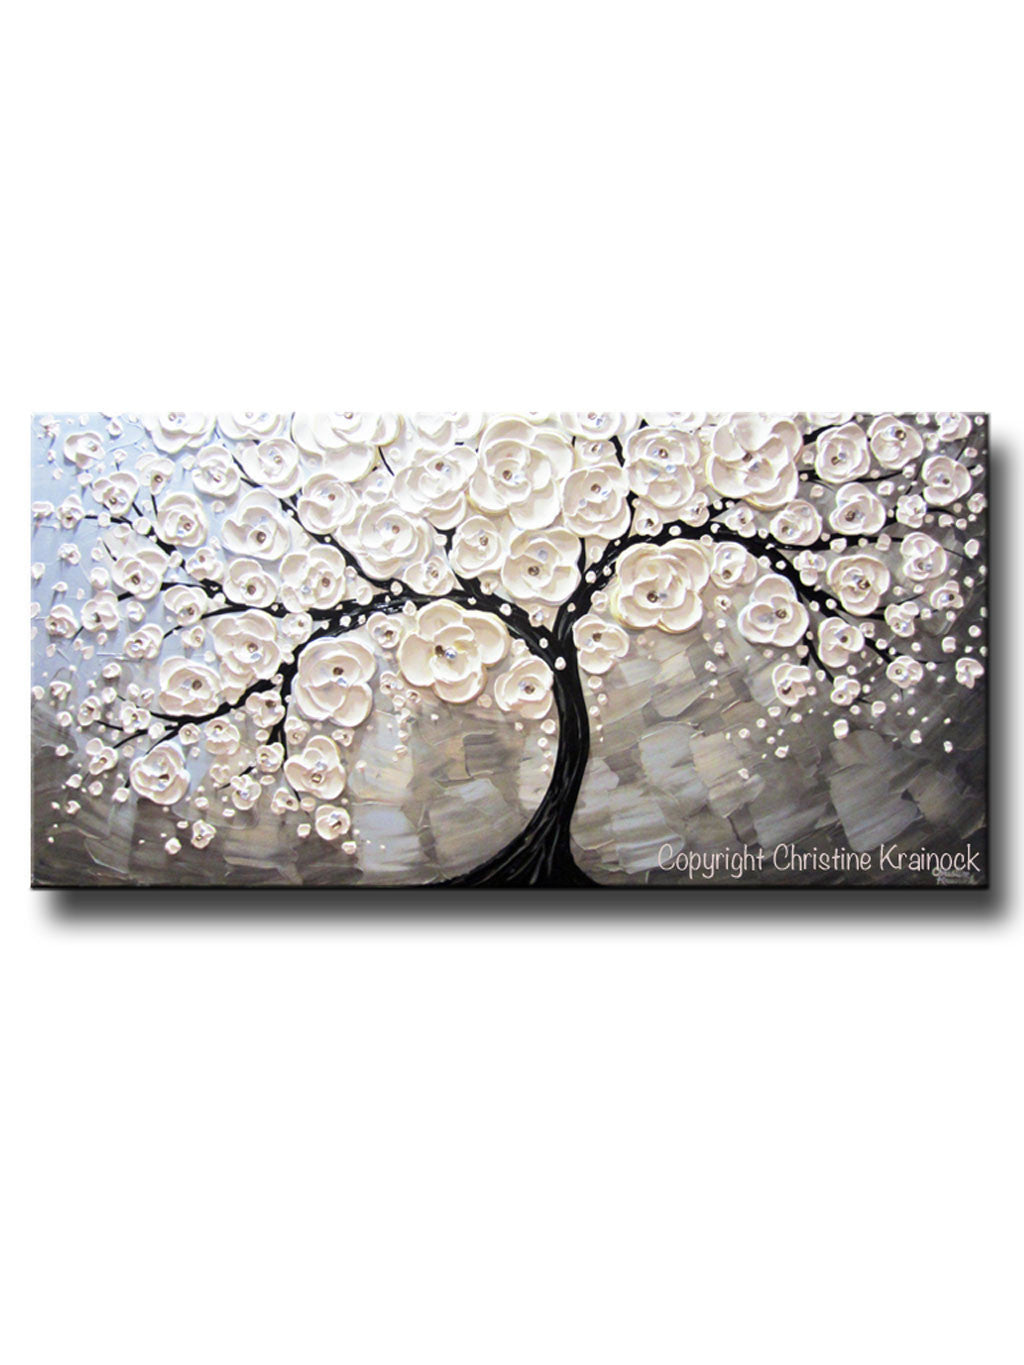 Load image into Gallery viewer, ORIGINAL Art Abstract Painting White Cherry Tree Blossoms Flowers Textured Blue Grey - Christine Krainock Art - Contemporary Art by Christine - 1
